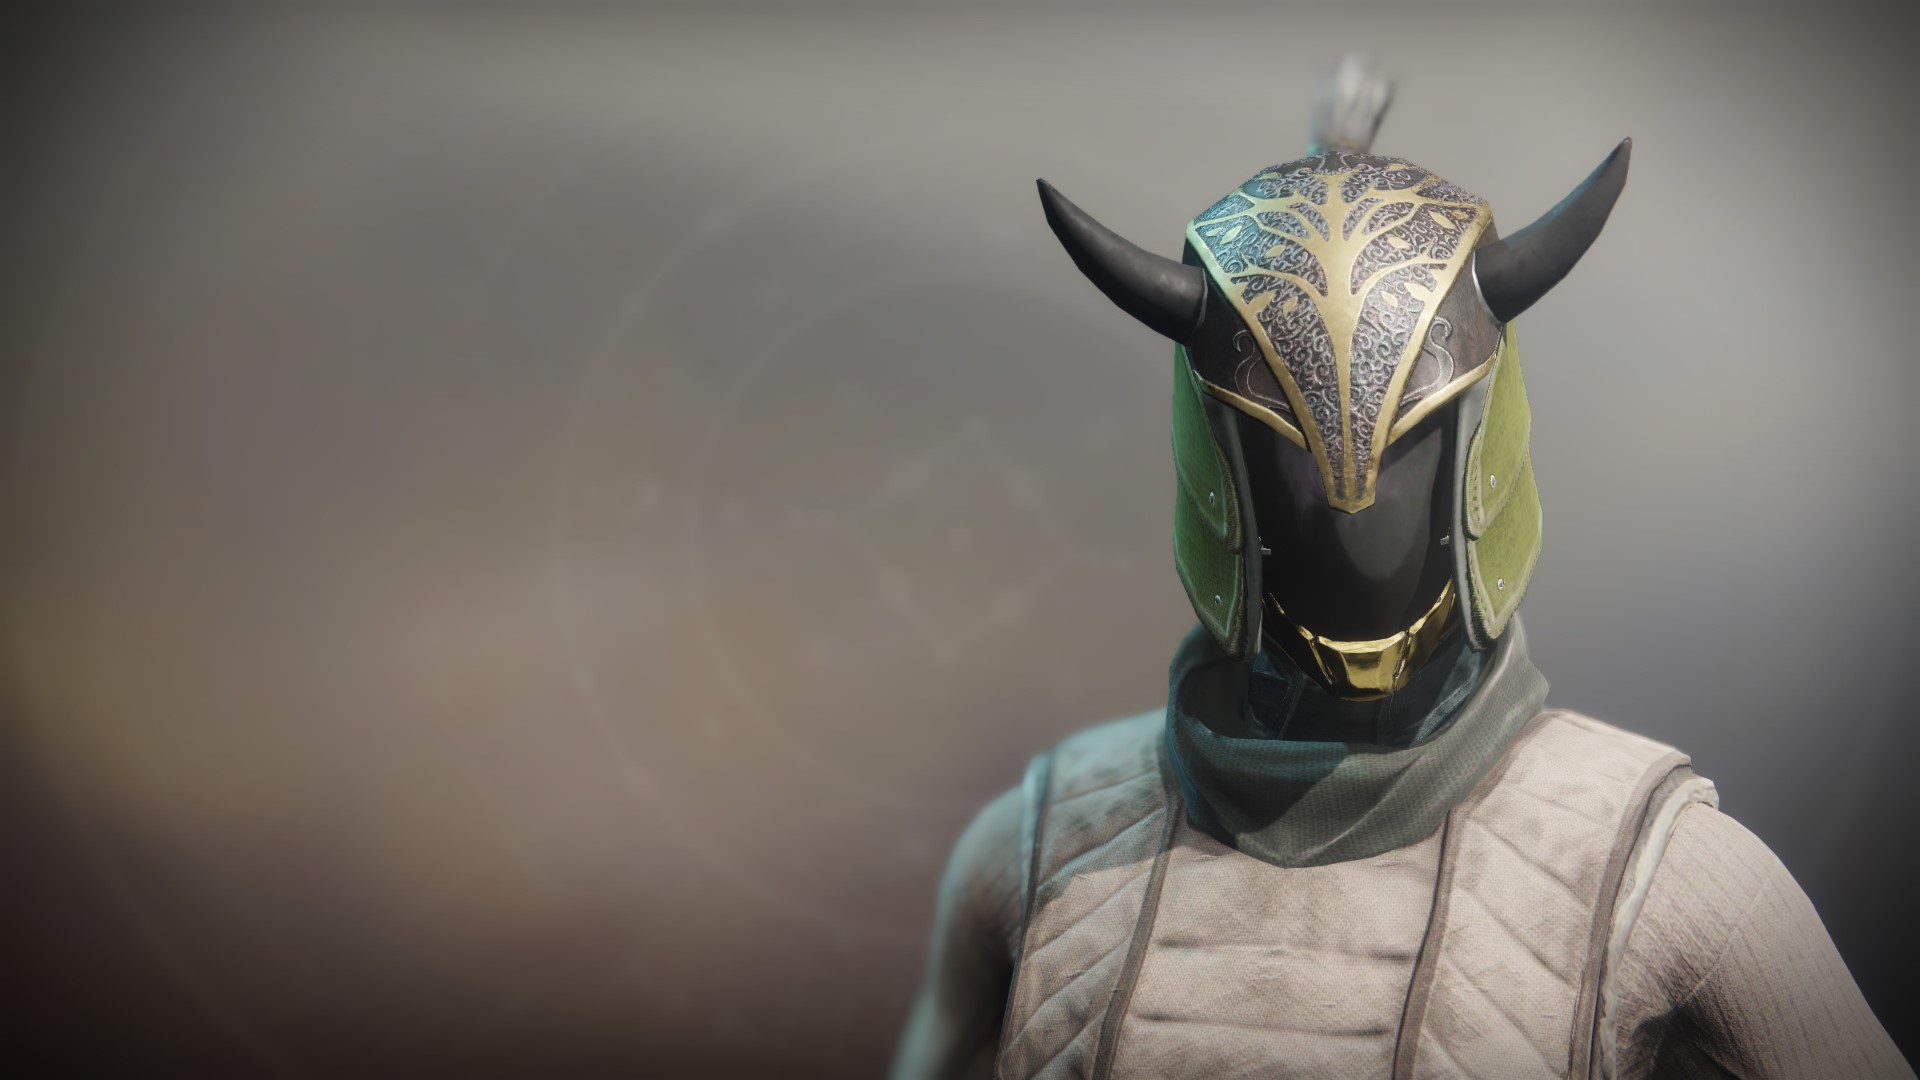 Full stats and details for 鋼鐵貢品兜帽, a Helmet in Destiny 2. 